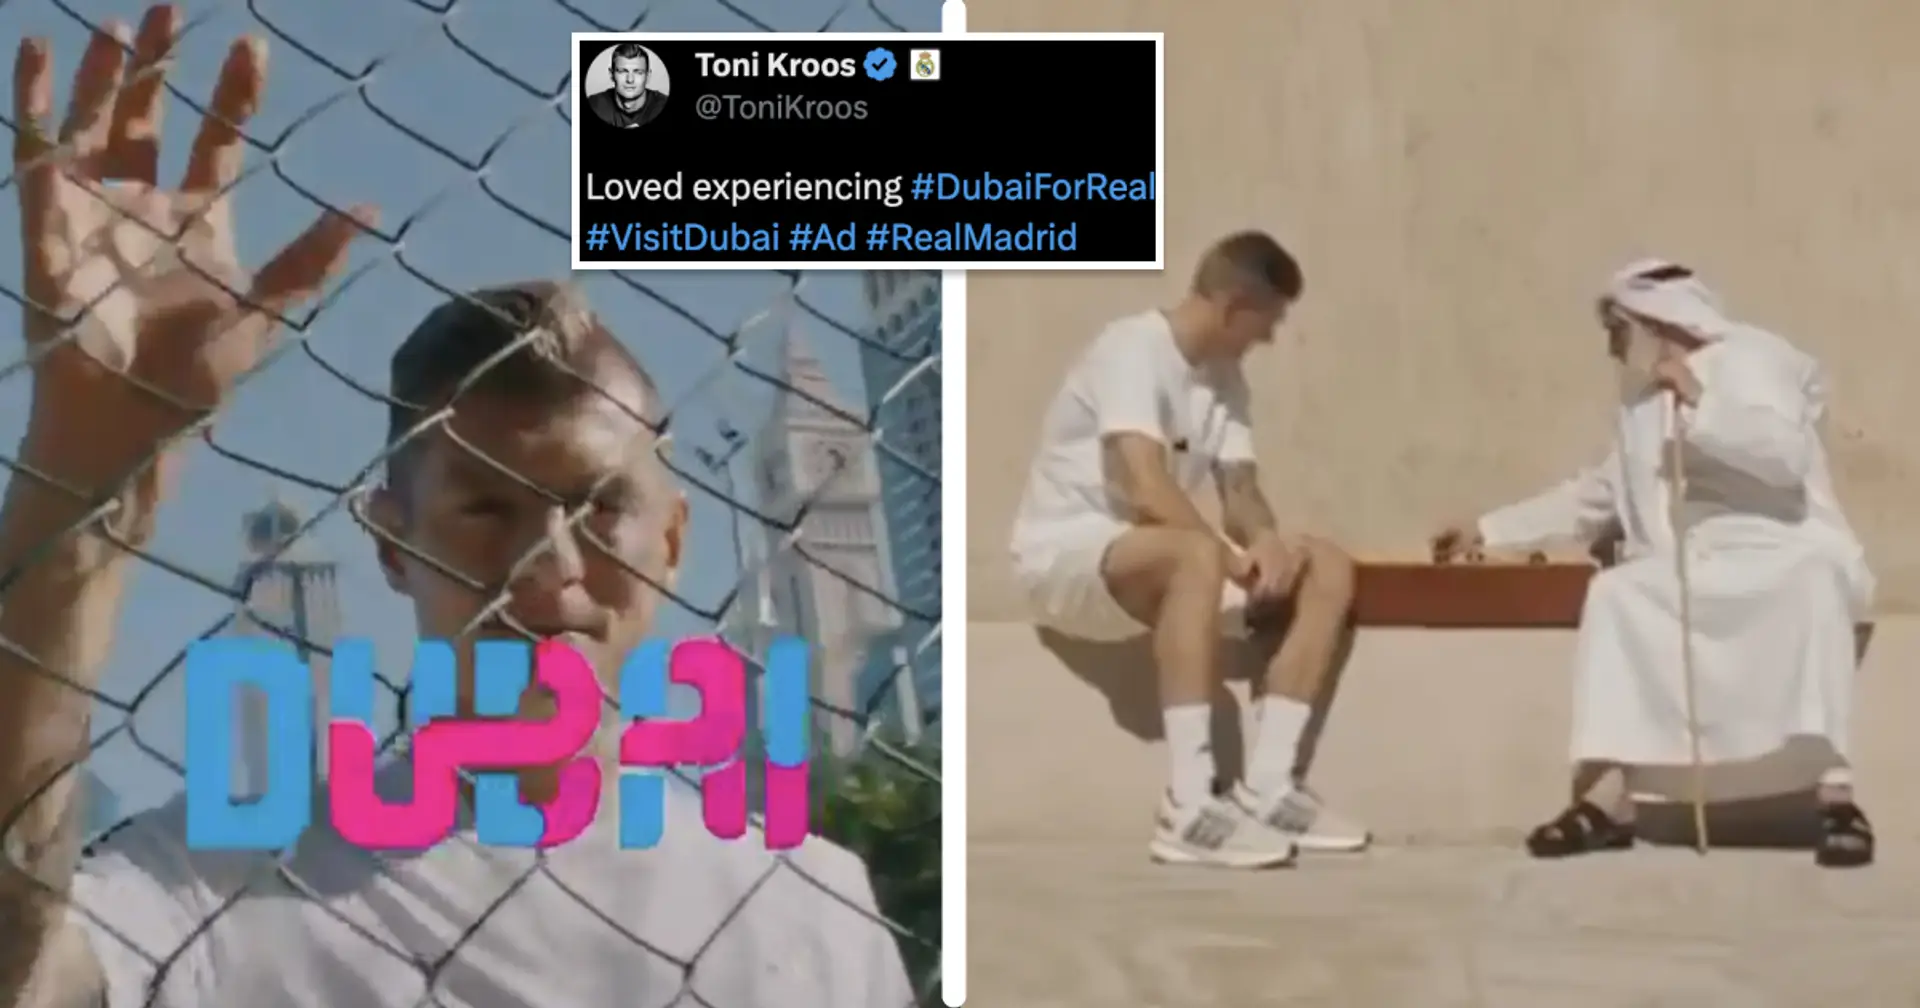 'Money talks, right?': Fans react as Toni Kroos features in ad promoting tourism in Emirates